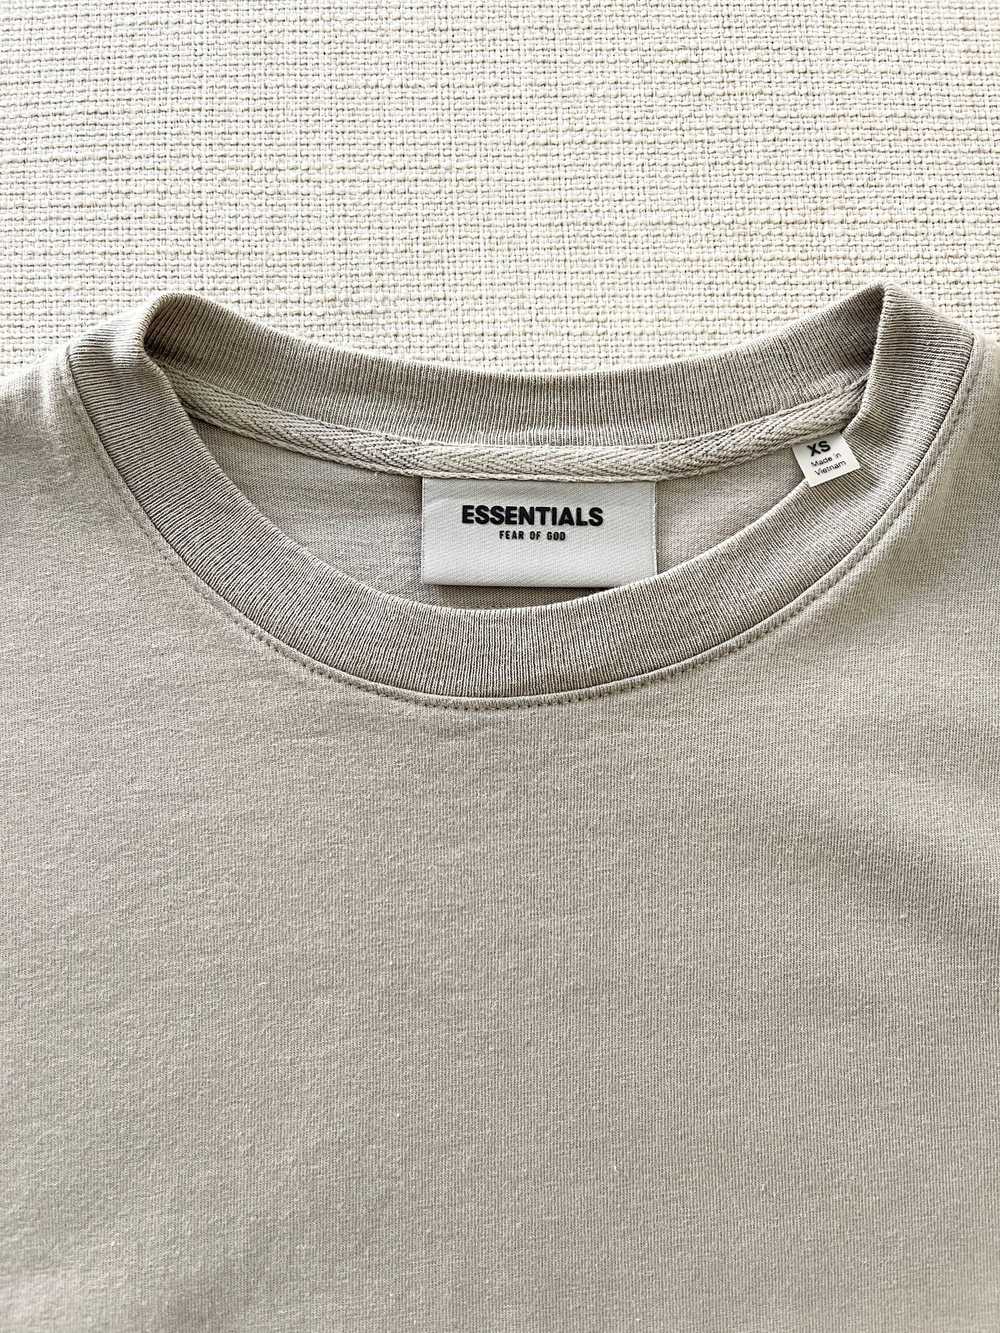 Essentials × Fear of God STEAL! Essentials Back L… - image 5